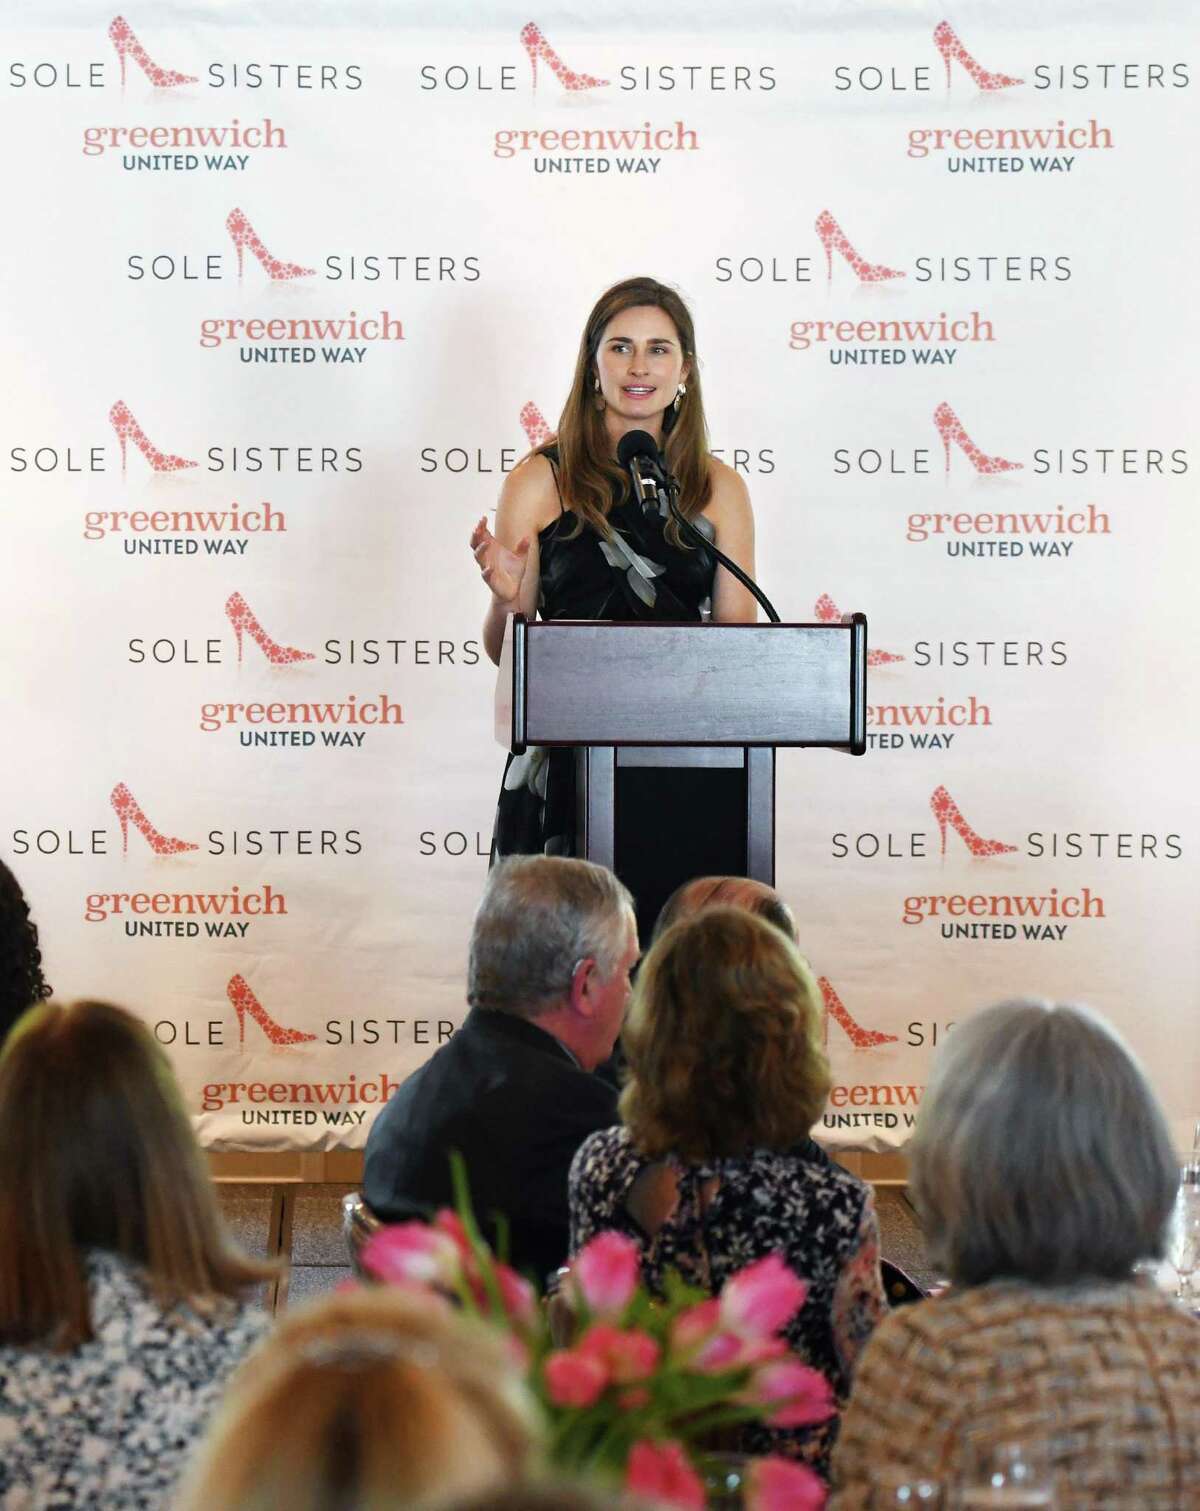 Lauren Bush Lauren delivers the keynote speech at the Greenwich United Way’s annual Sole Sisters luncheon Tuesday.